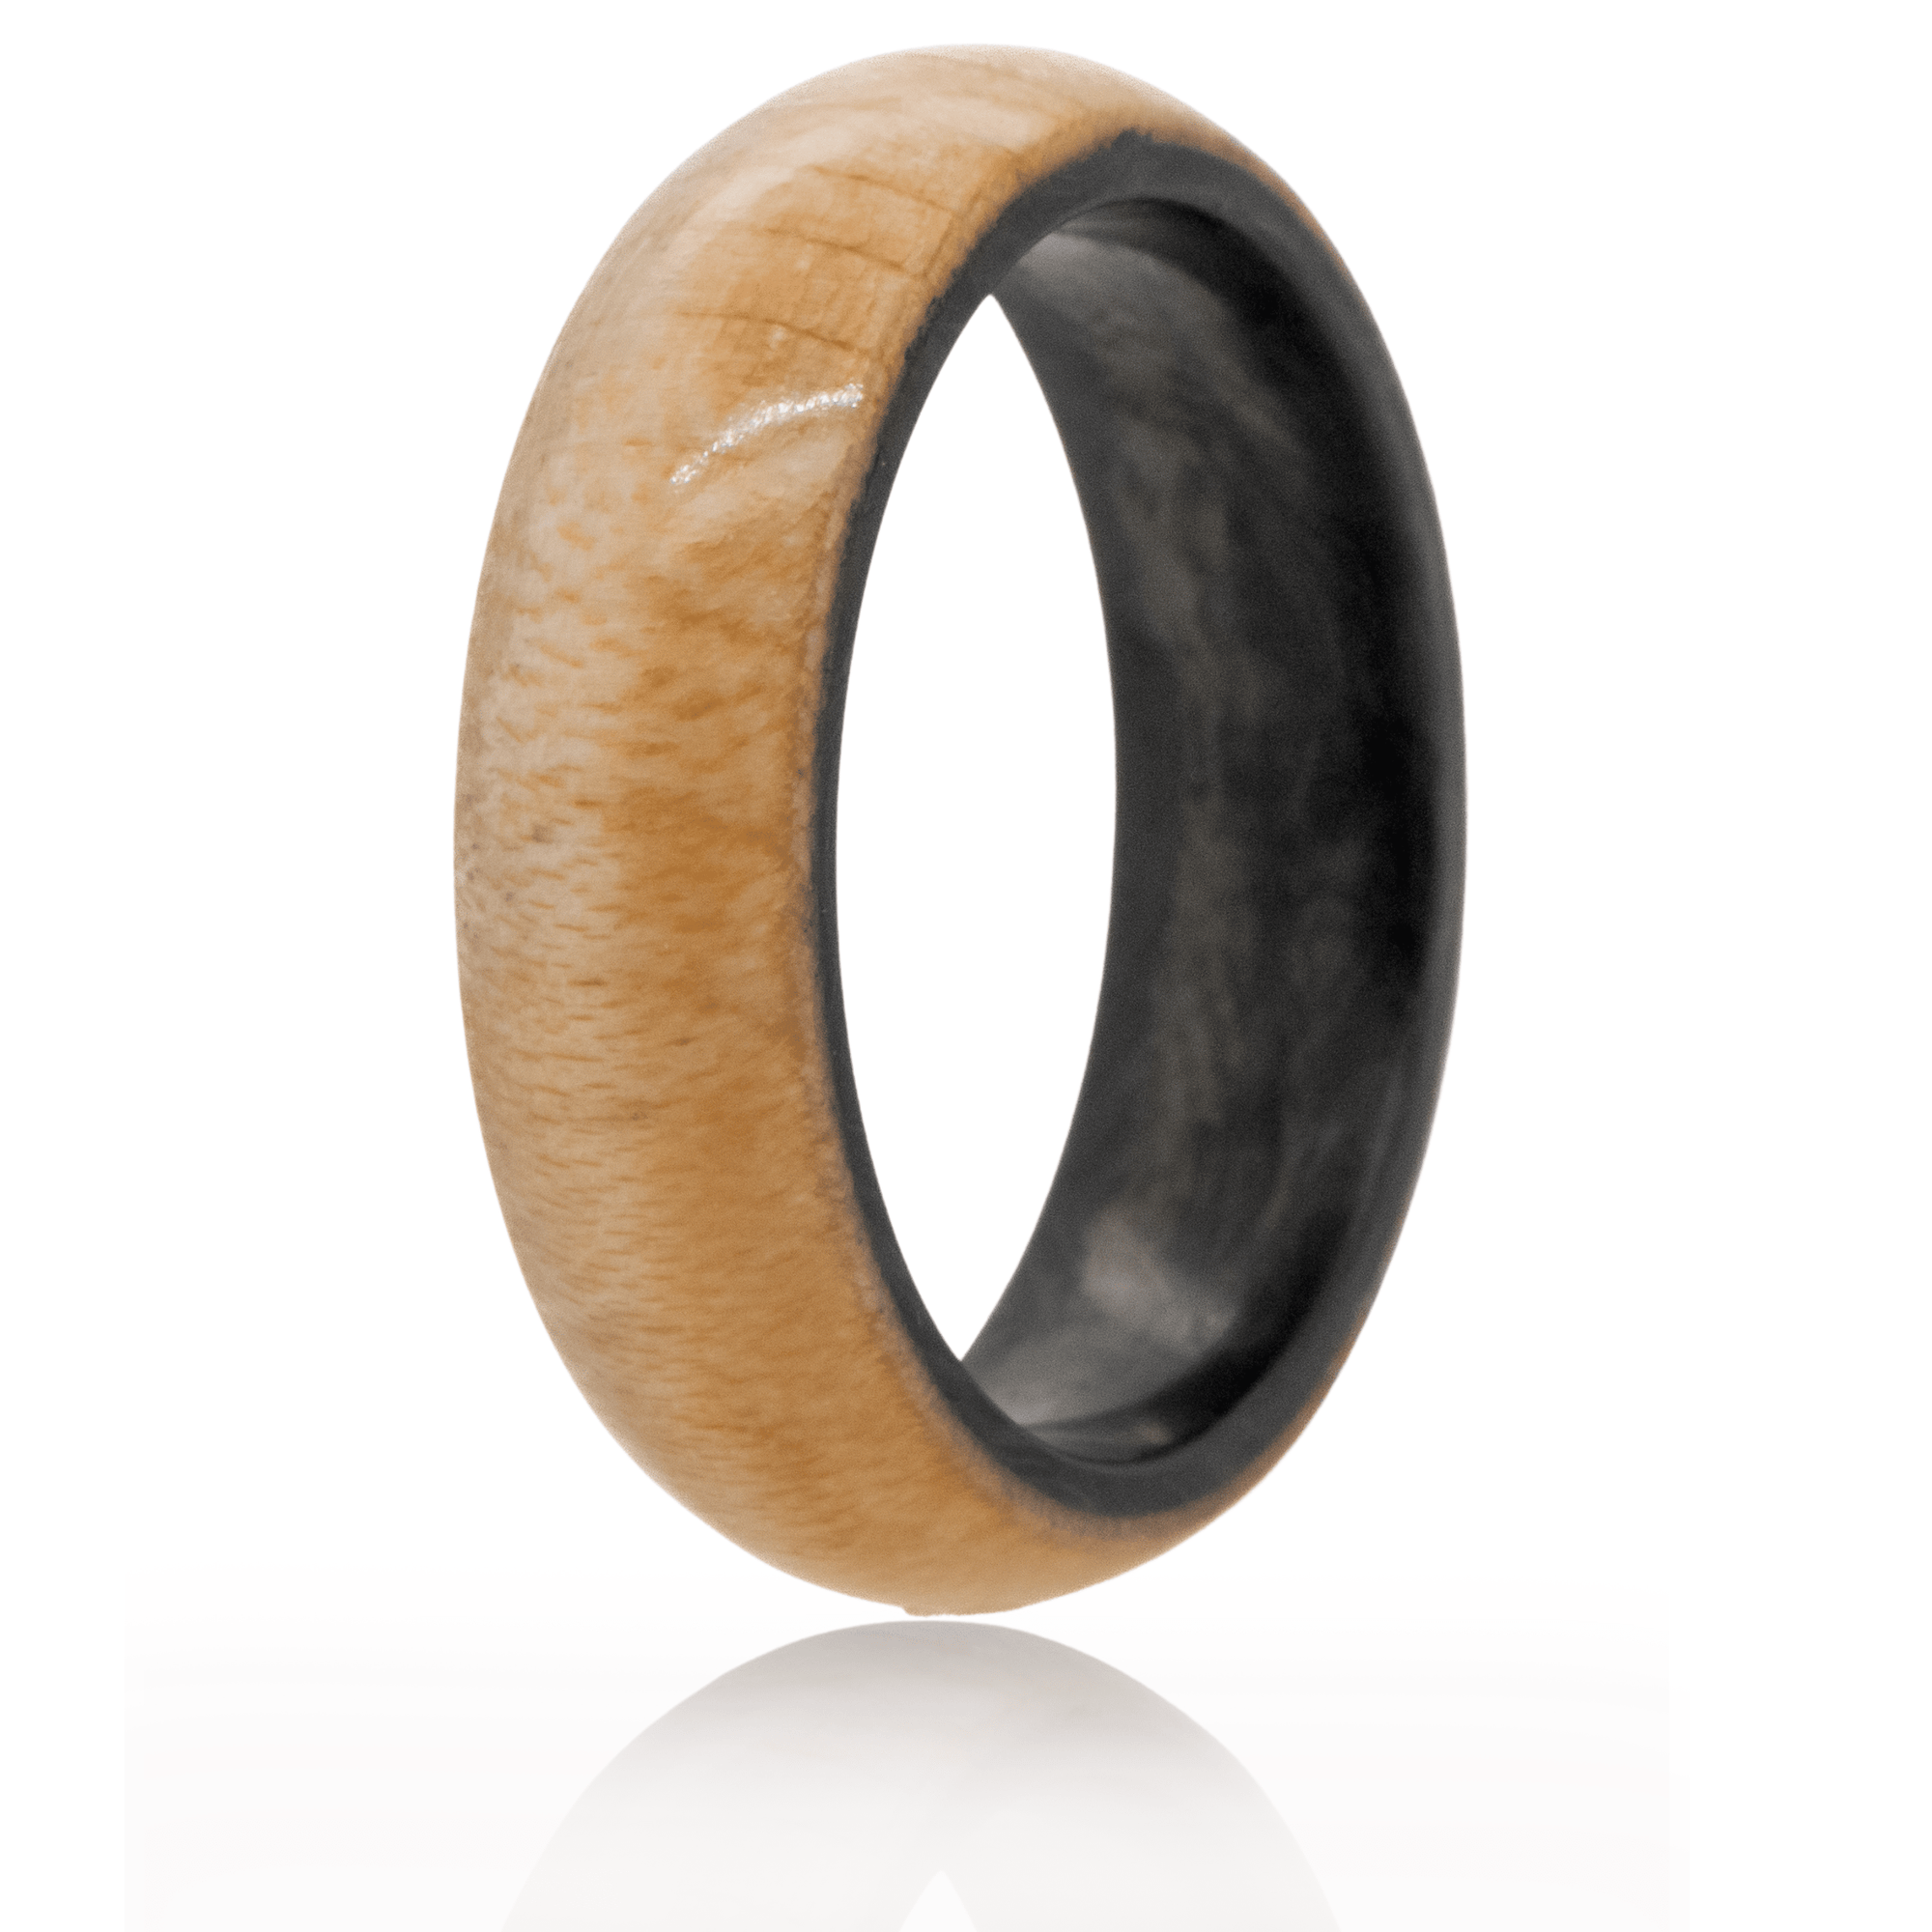 Maple wood ring with forged carbon fiber interior. 